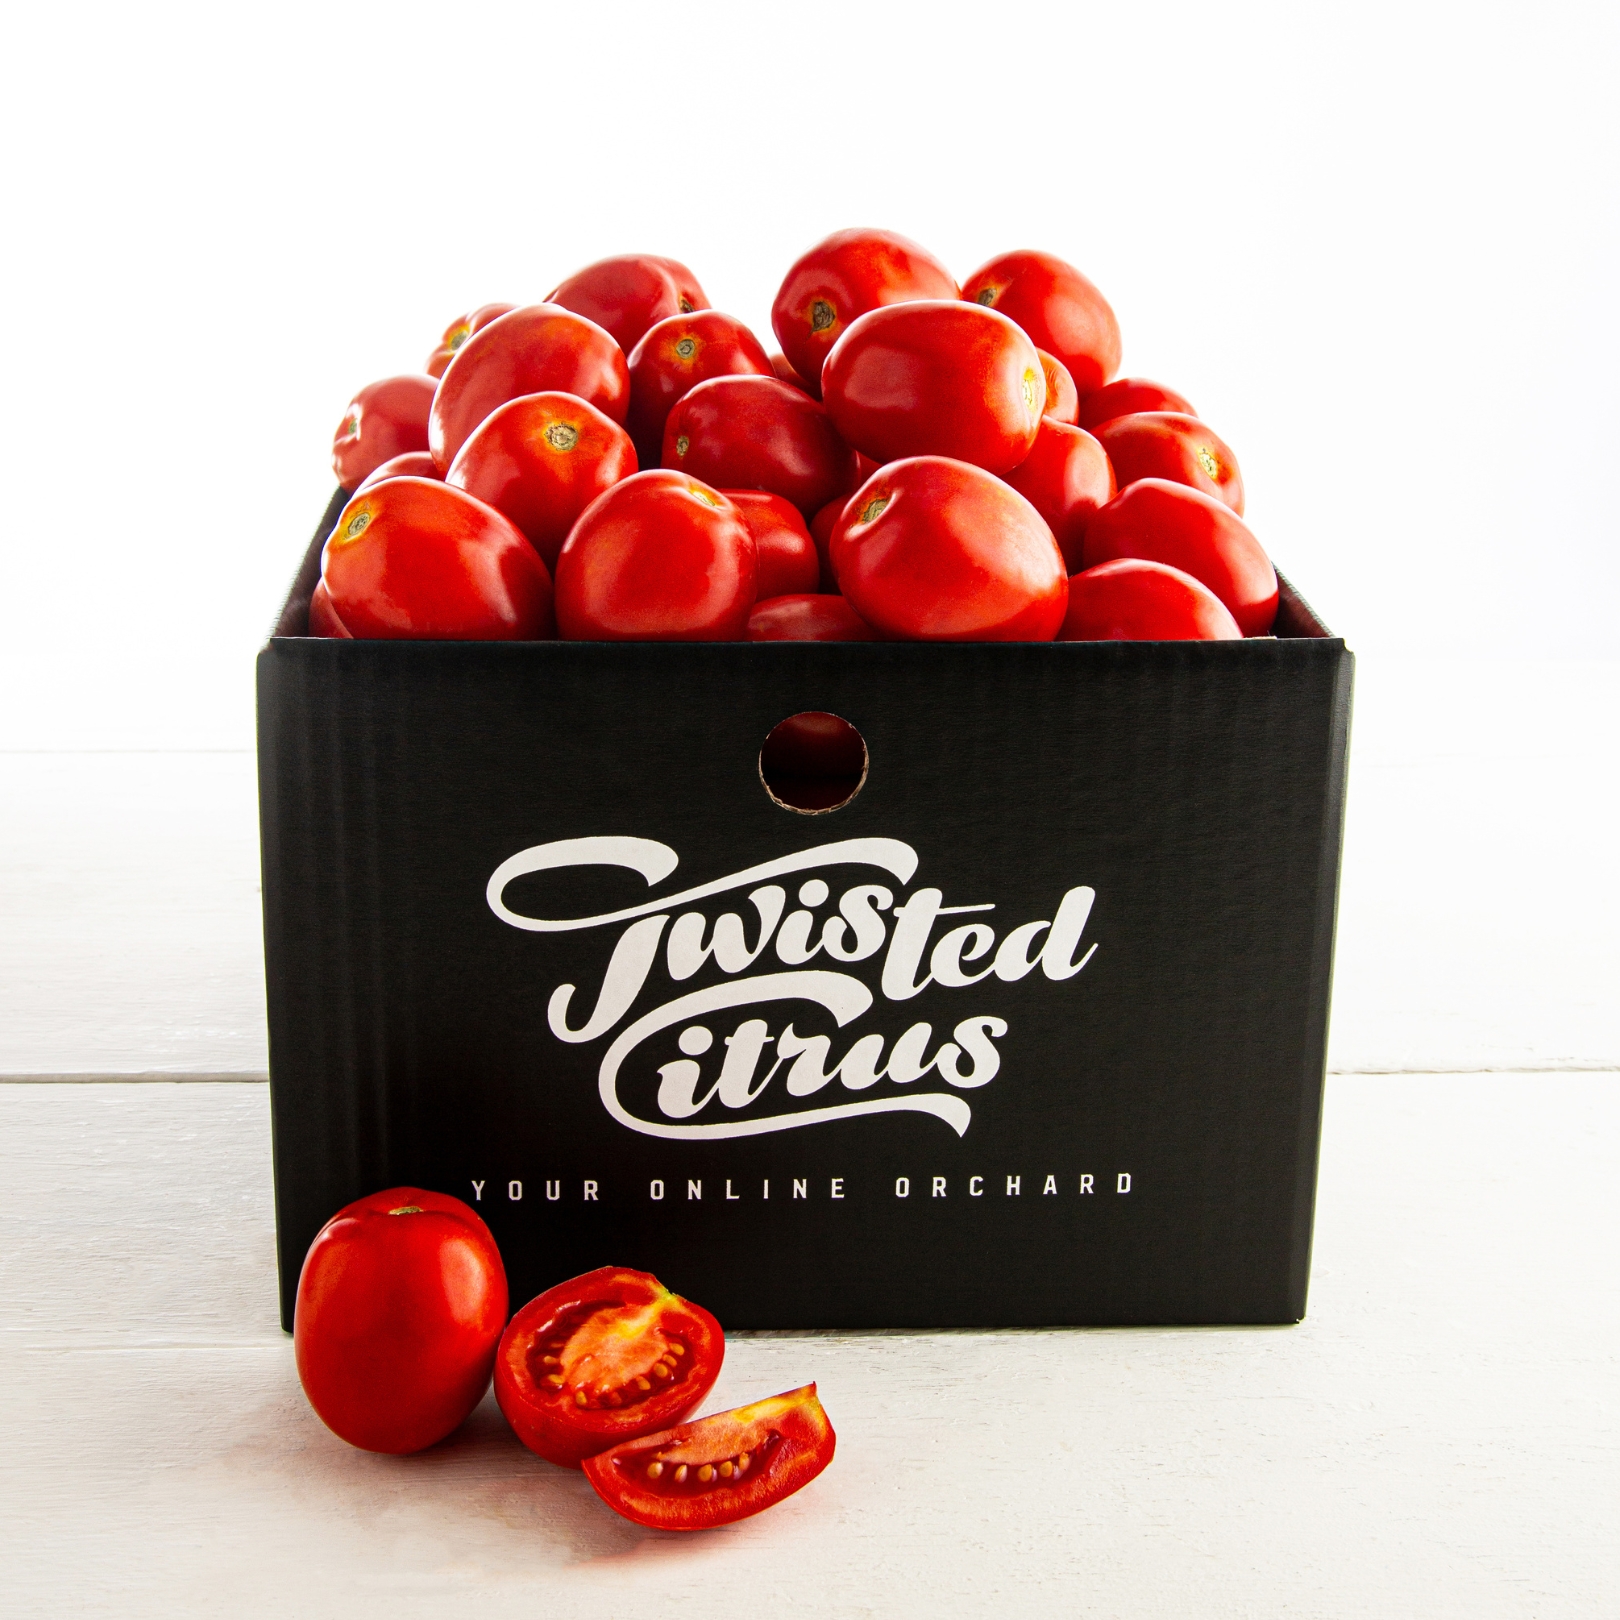 Buy Tomatoes - Roma Online NZ